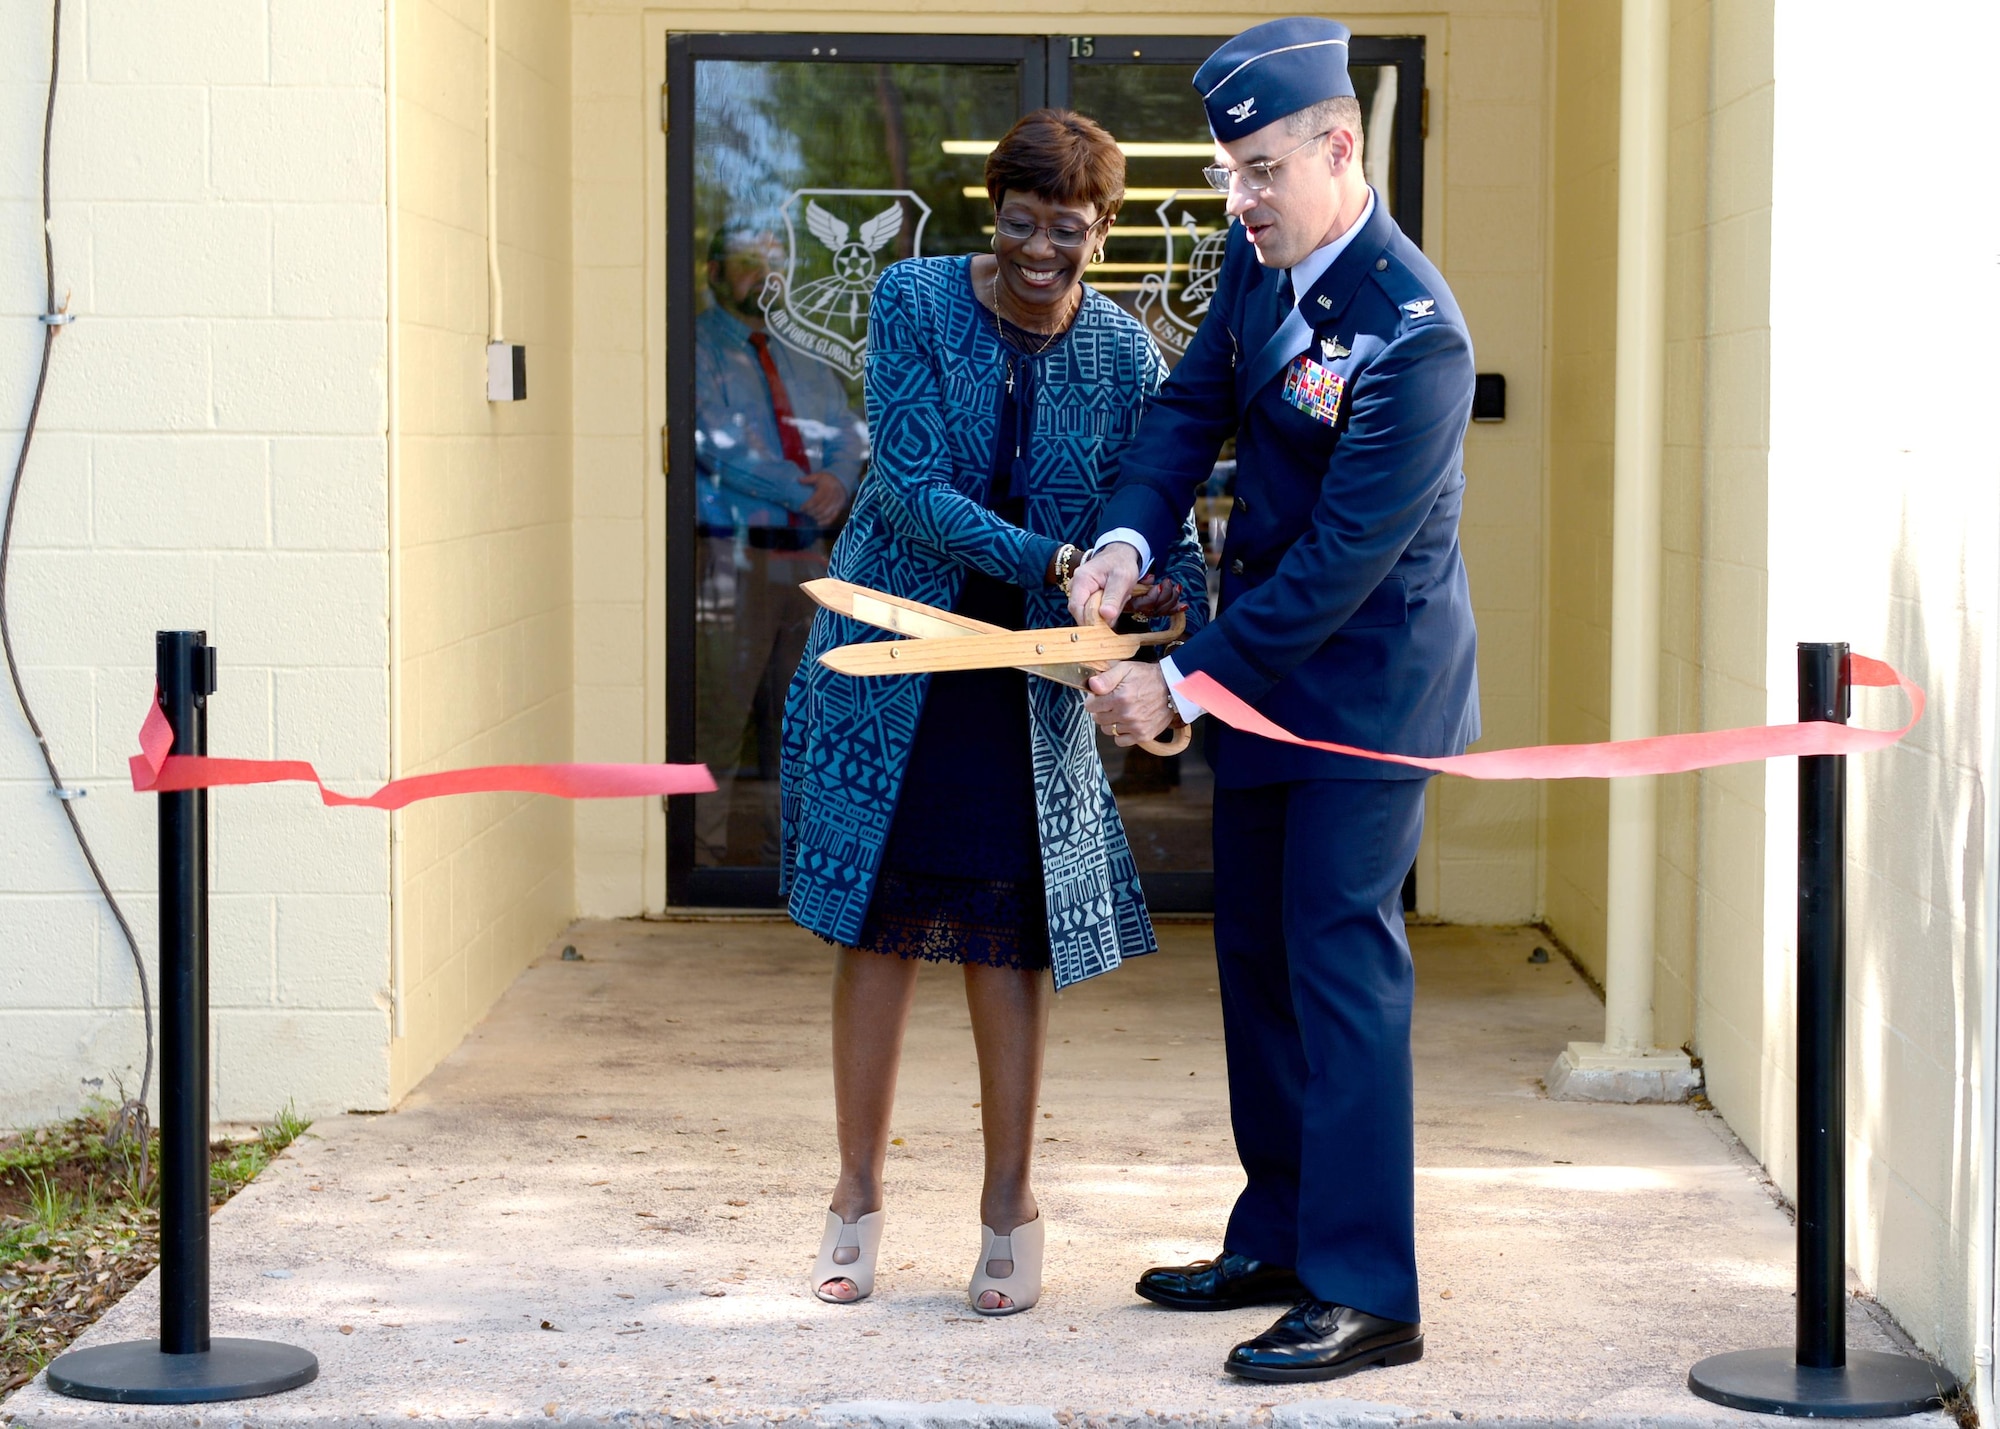 Col. Mark Jablow, Air Force Command, Control and Communications Center commander and The Honorable Ollie Tyler, Shreveport mayor, cut the inauguration ribbon as part of an activation of command ceremony at Barksdale Air Force Base, La., April 3, 2017.  The U.S. Air Force Nuclear Command, Control and Communication Center streamlines the management of approximately 62 different systems and forms a single NC3 point of contact and advocate for the entire Air Force. (U.S. Air Force Photo/Senior Airman Mozer O. Da Cunha)